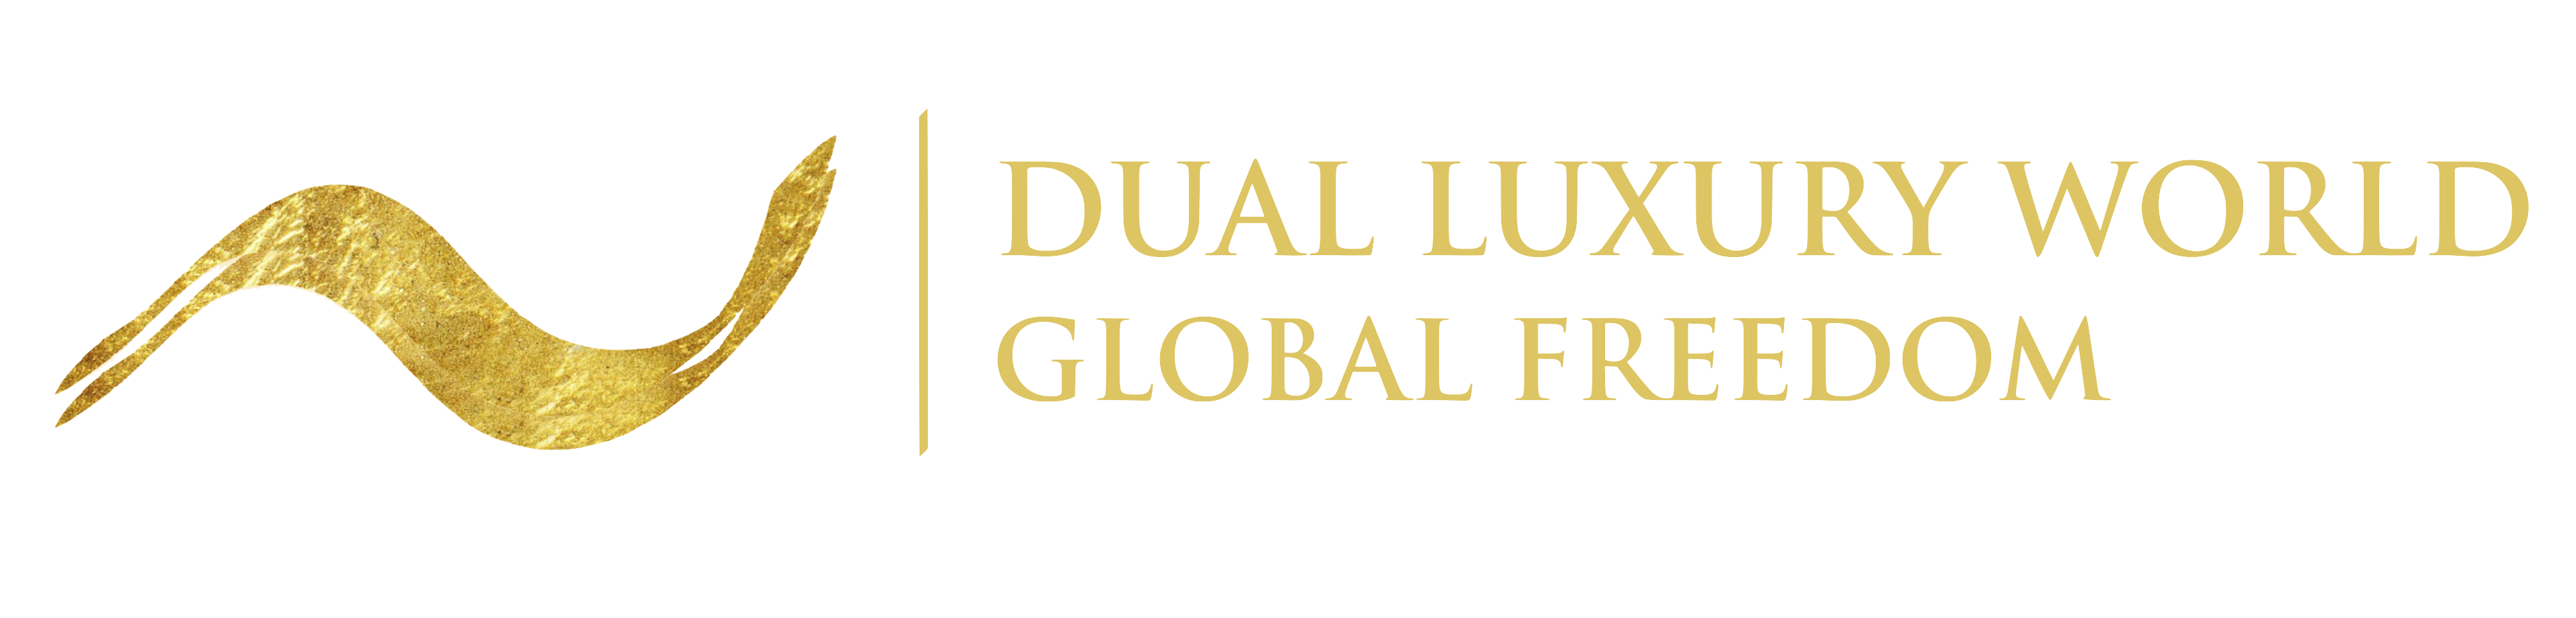 Dual Luxury World - Second Passport, Citizenship & Residency by Investment